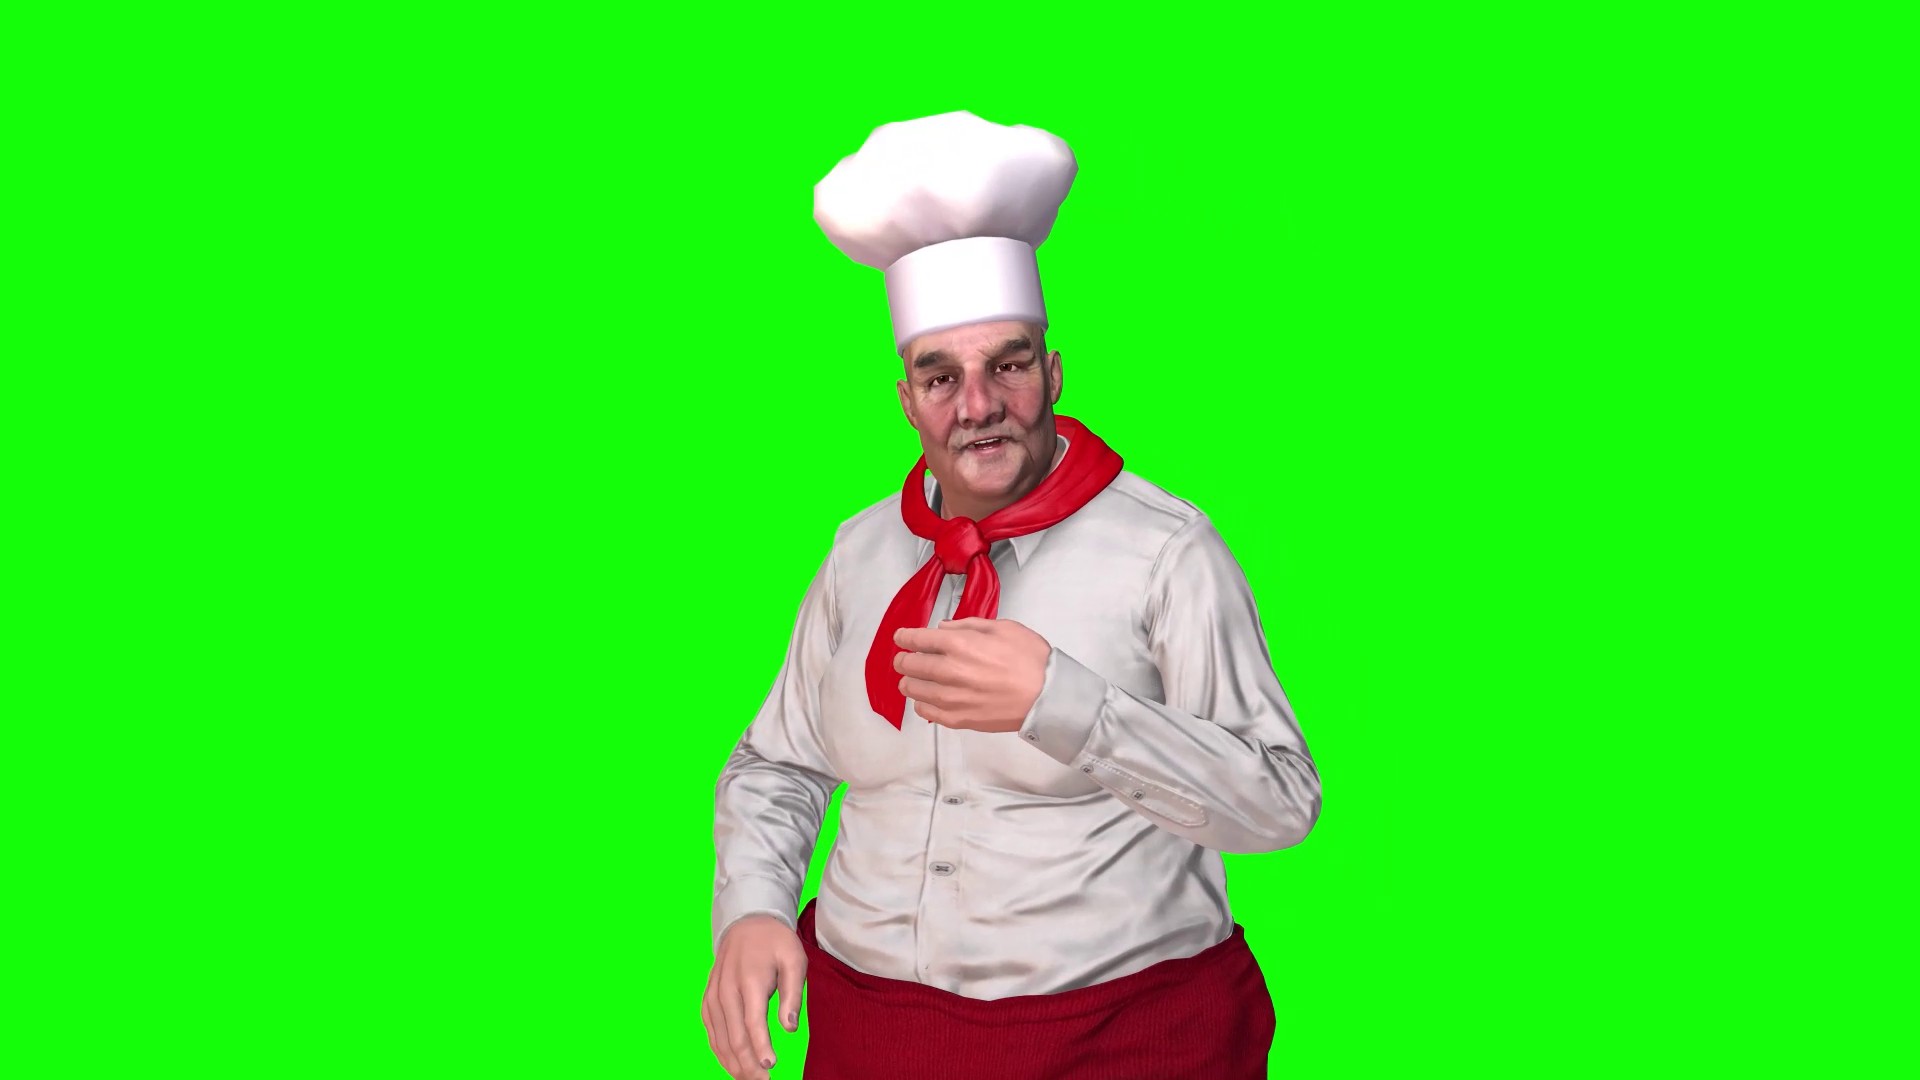 Fat Chef Uncle Dancing Fun in Green Chromakey